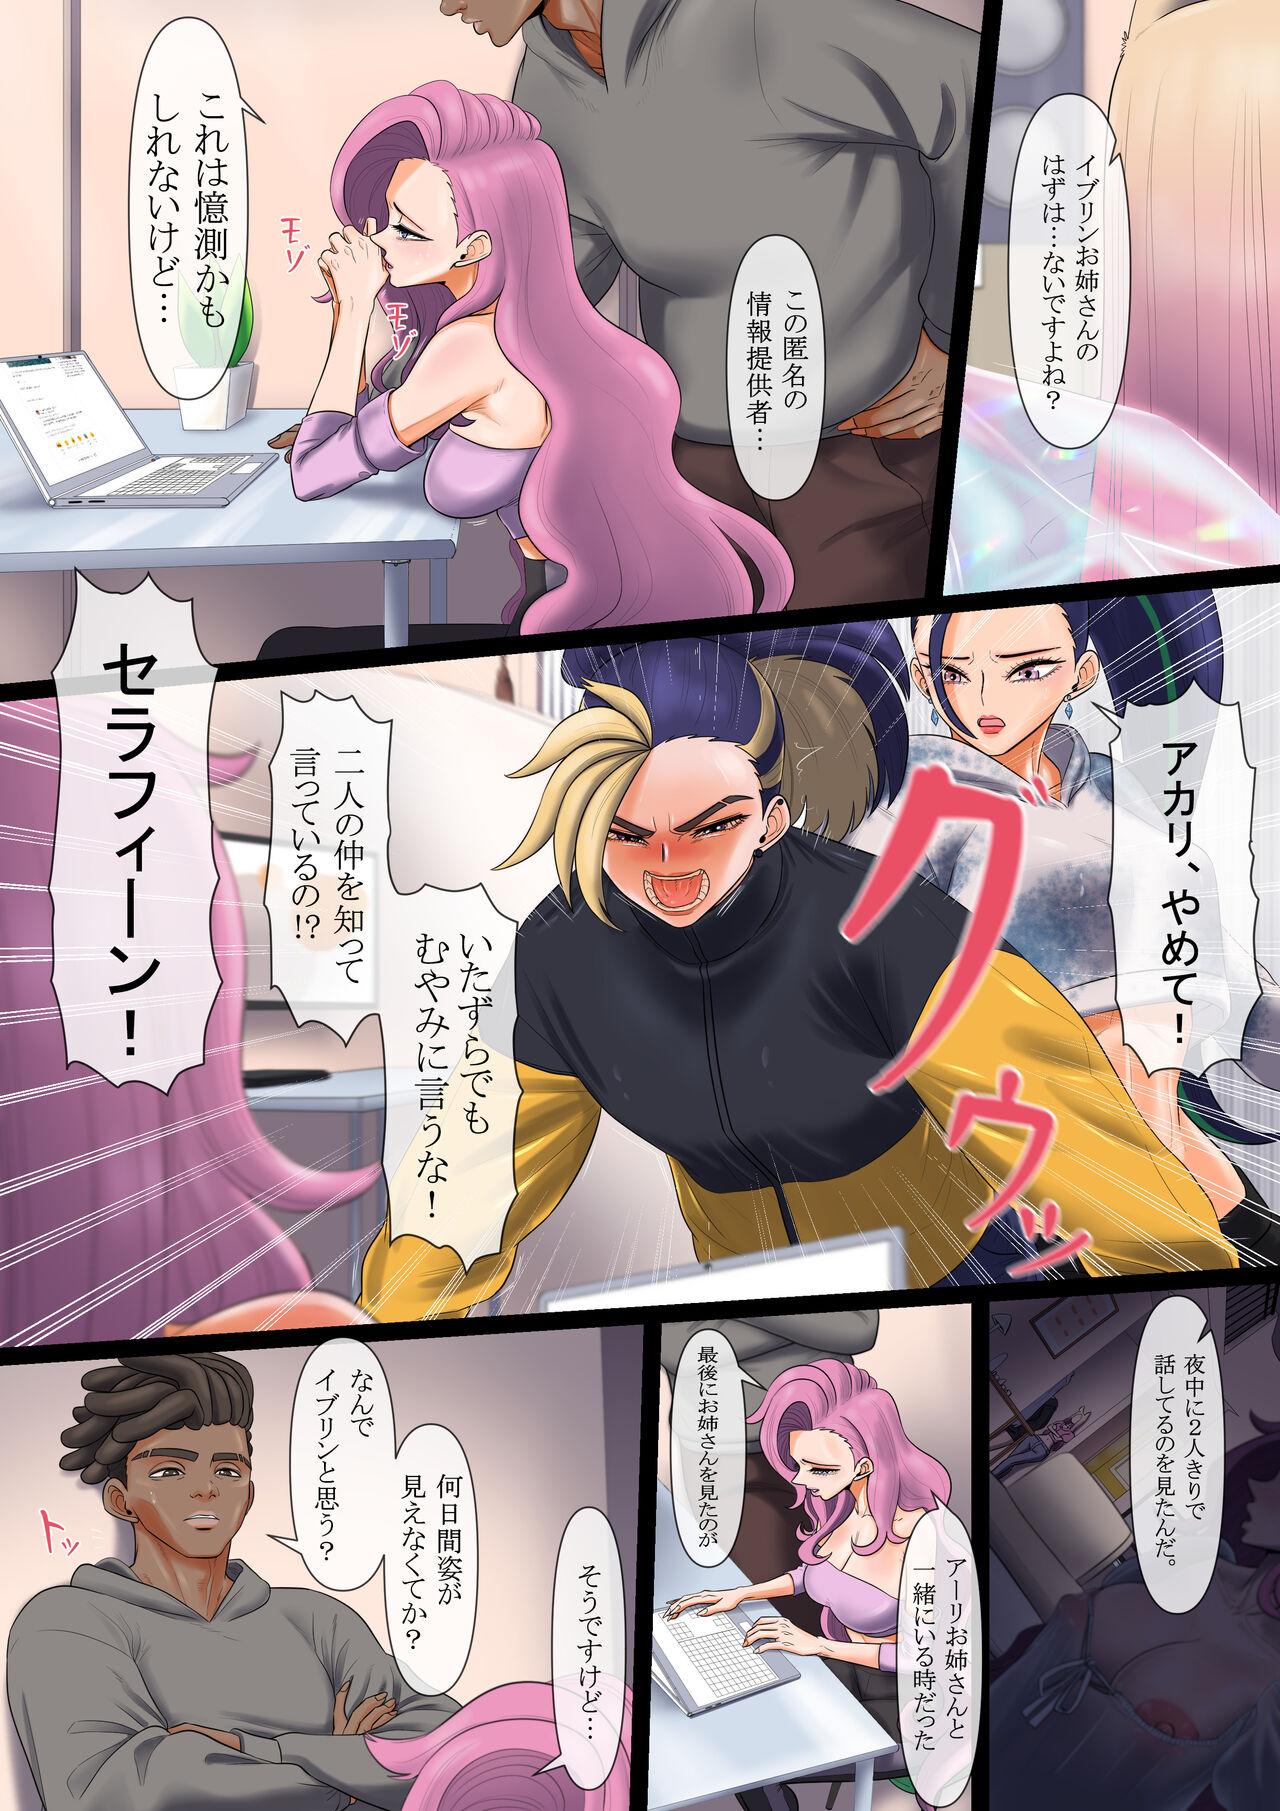 Milfsex 守りたいもの... - League of legends Close Up - Page 3